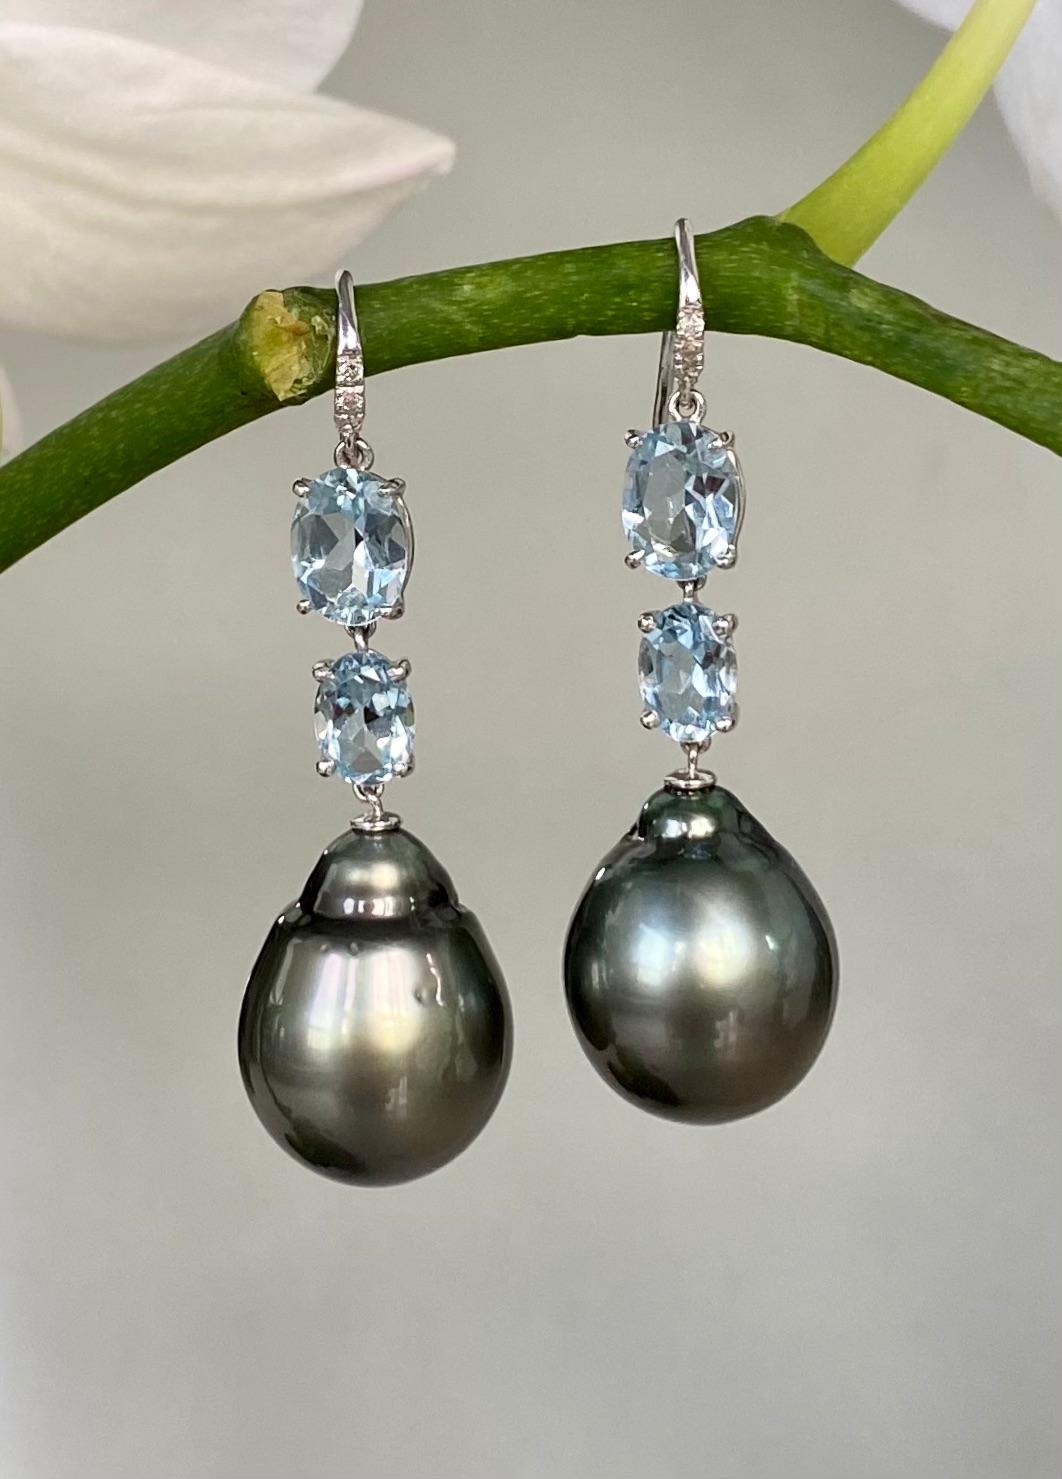 Black Tahitian pearls, faceted aquamarines and diamond dangle earrings, handcrafted in 18 karat white gold.

These exquisite one-of-a-kind black Tahitian baroque pearl earrings contrast with oval faceted aquamarines and diamonds to give you a